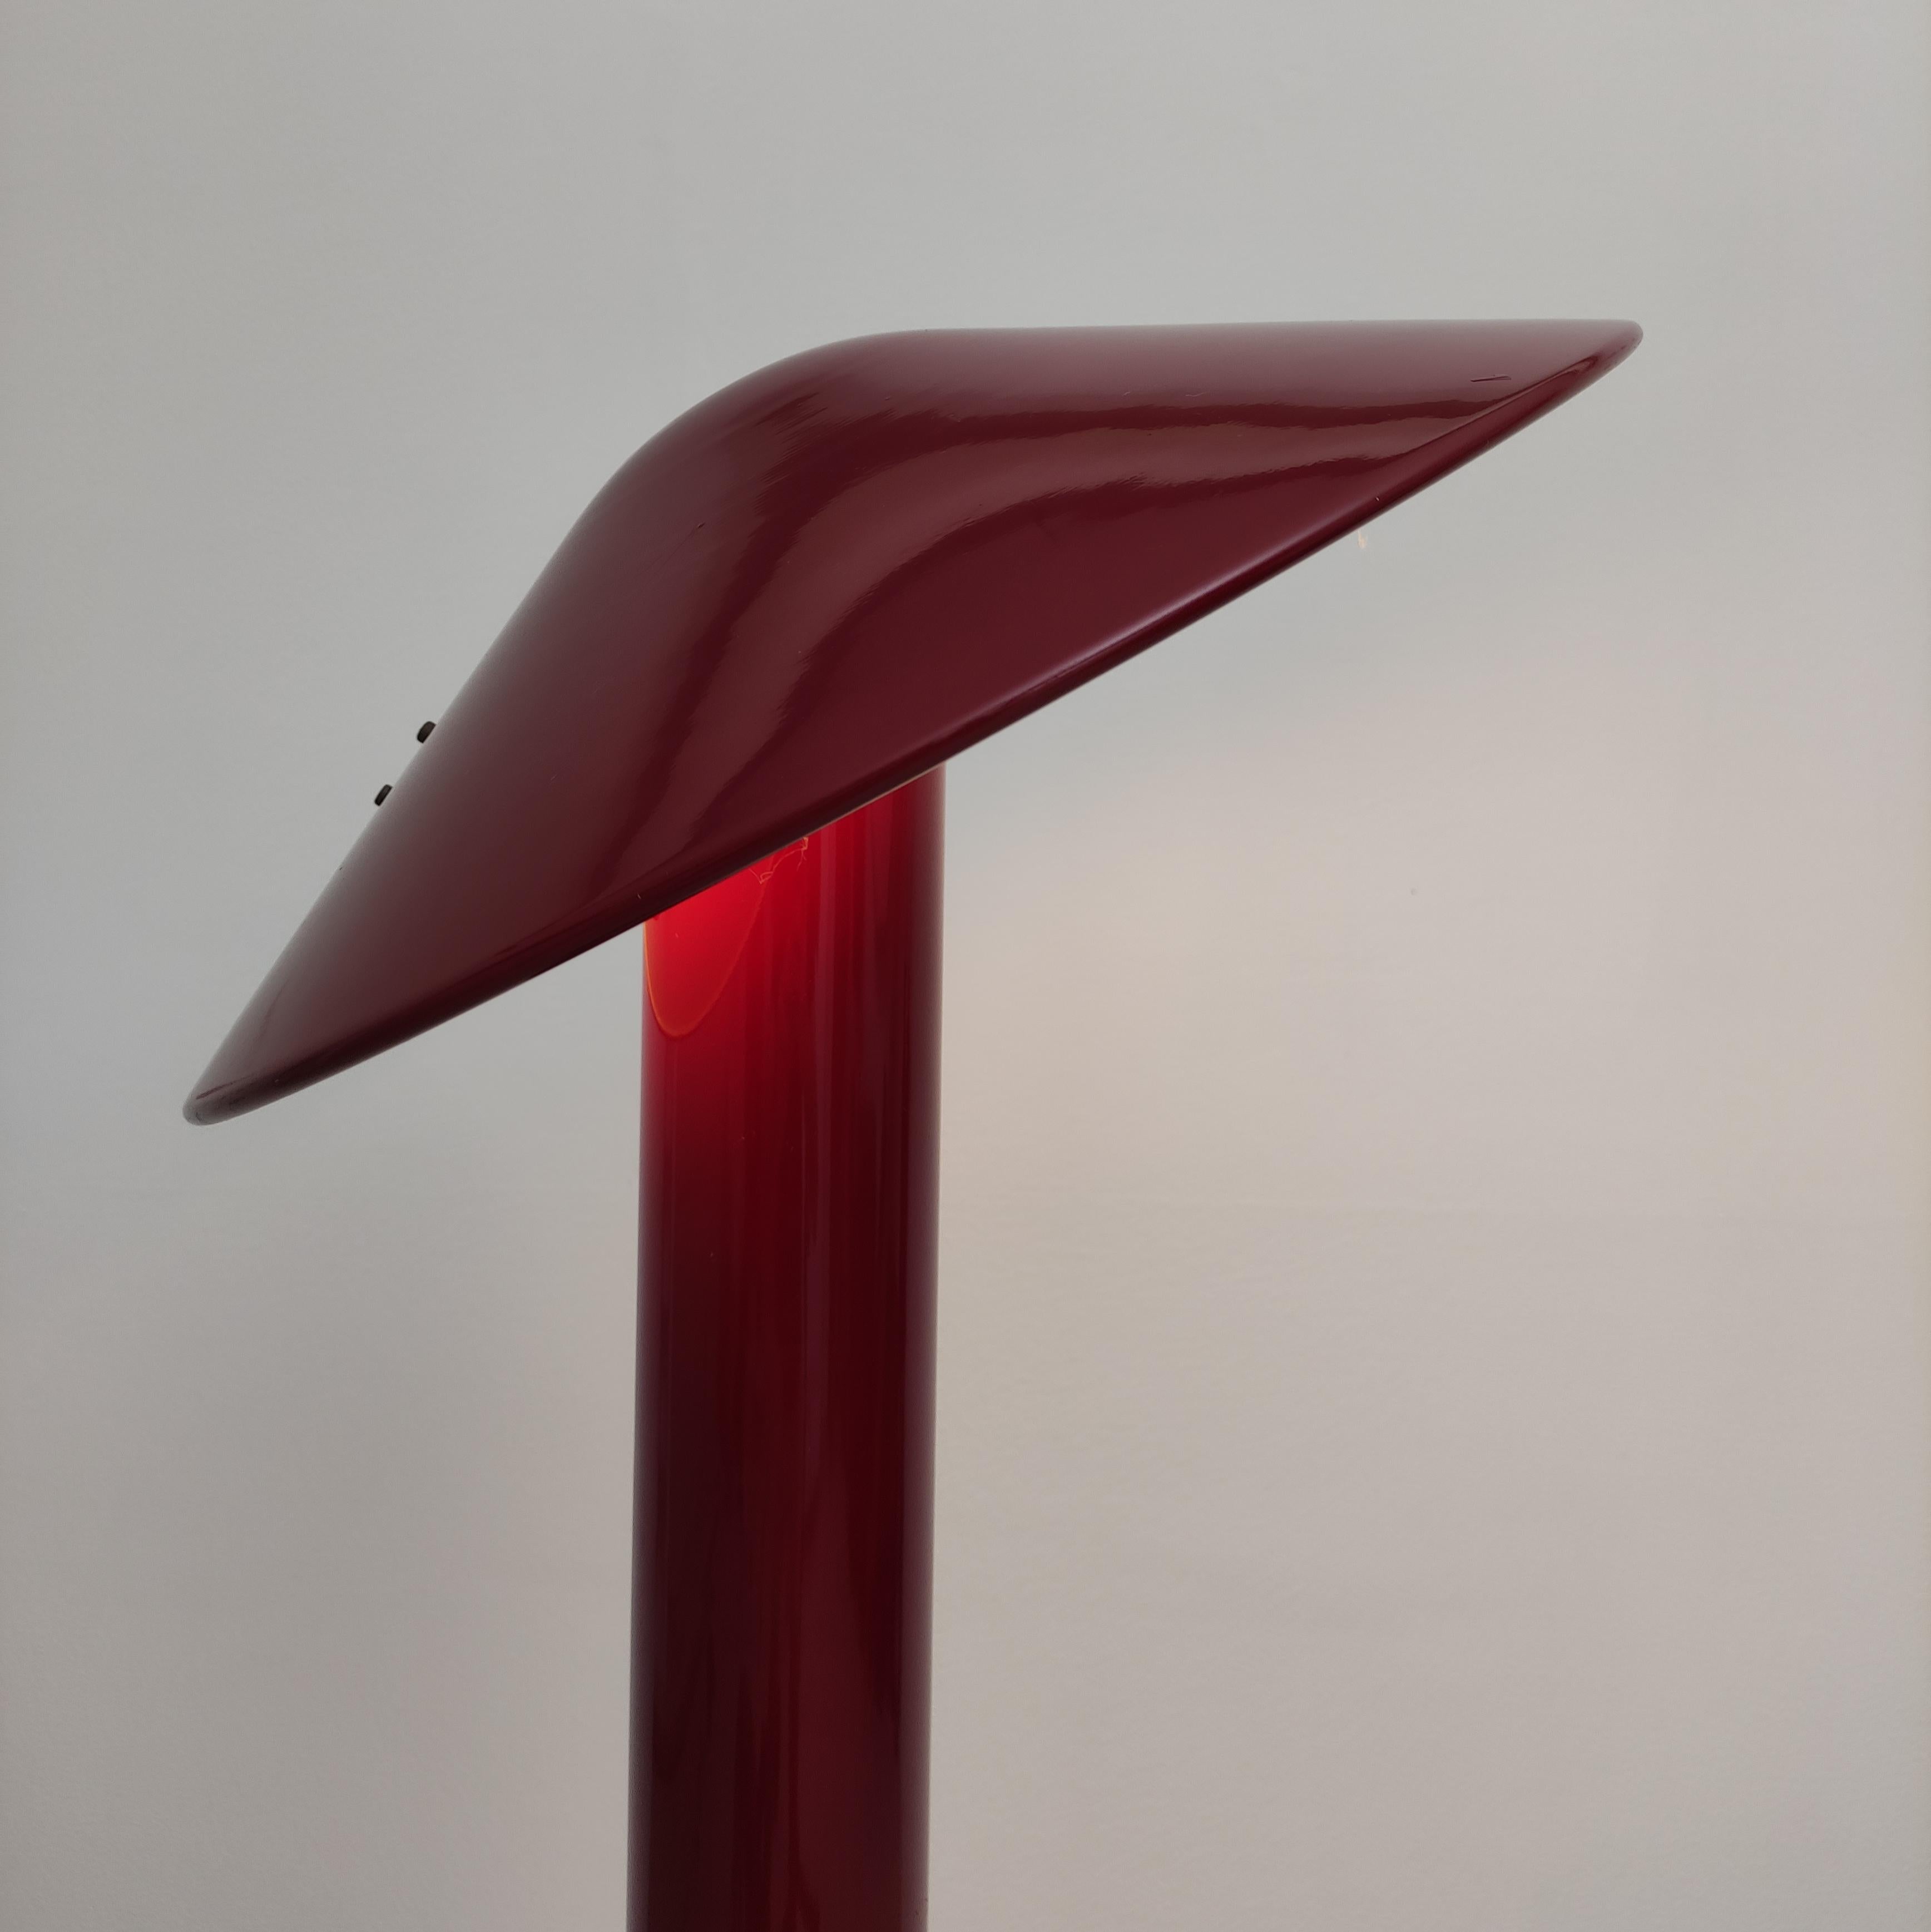 This Is and early model by italian manufactory Goffredo Reggiani floor lamp.
Very minimal and simplex form give to this lamp a stunning design, shade can be move to keep soft light, that came up from the tube!
A rare piece of absolutly beautiful